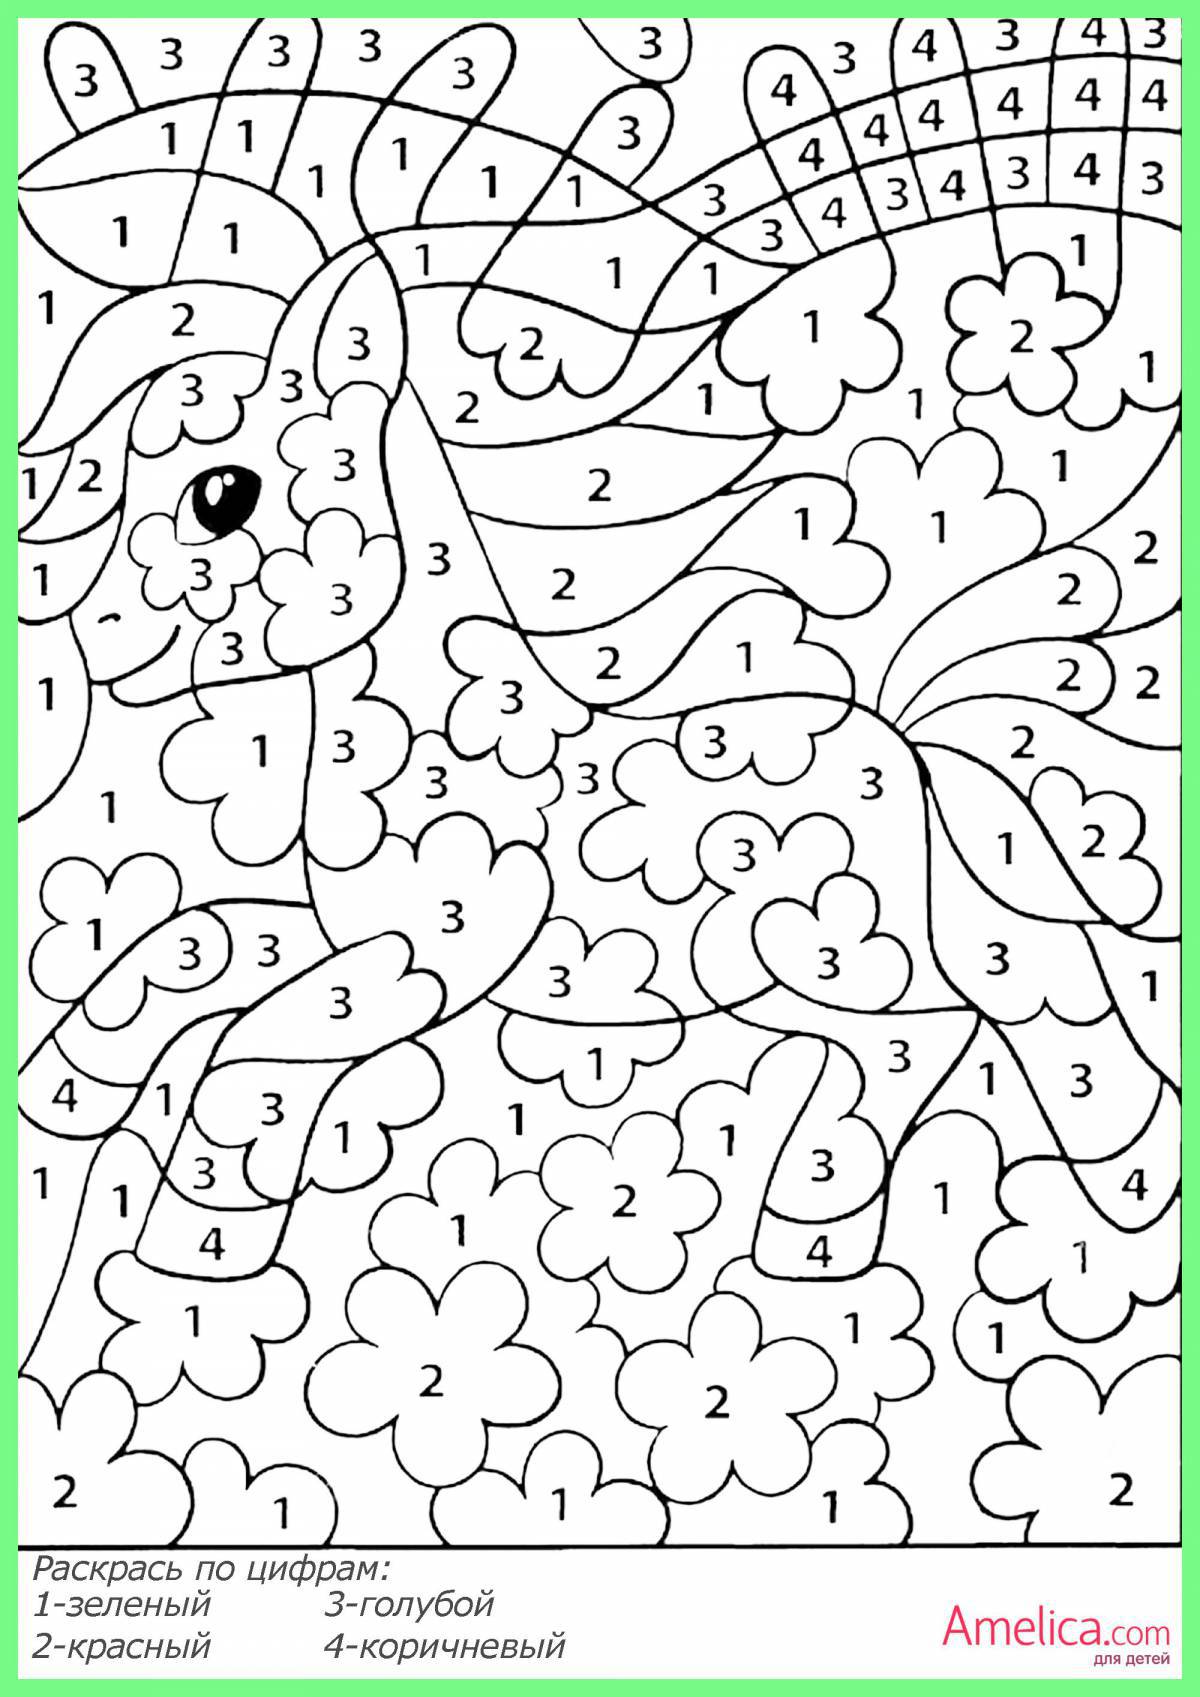 Bright coloring by numbers for children 5-7 years old